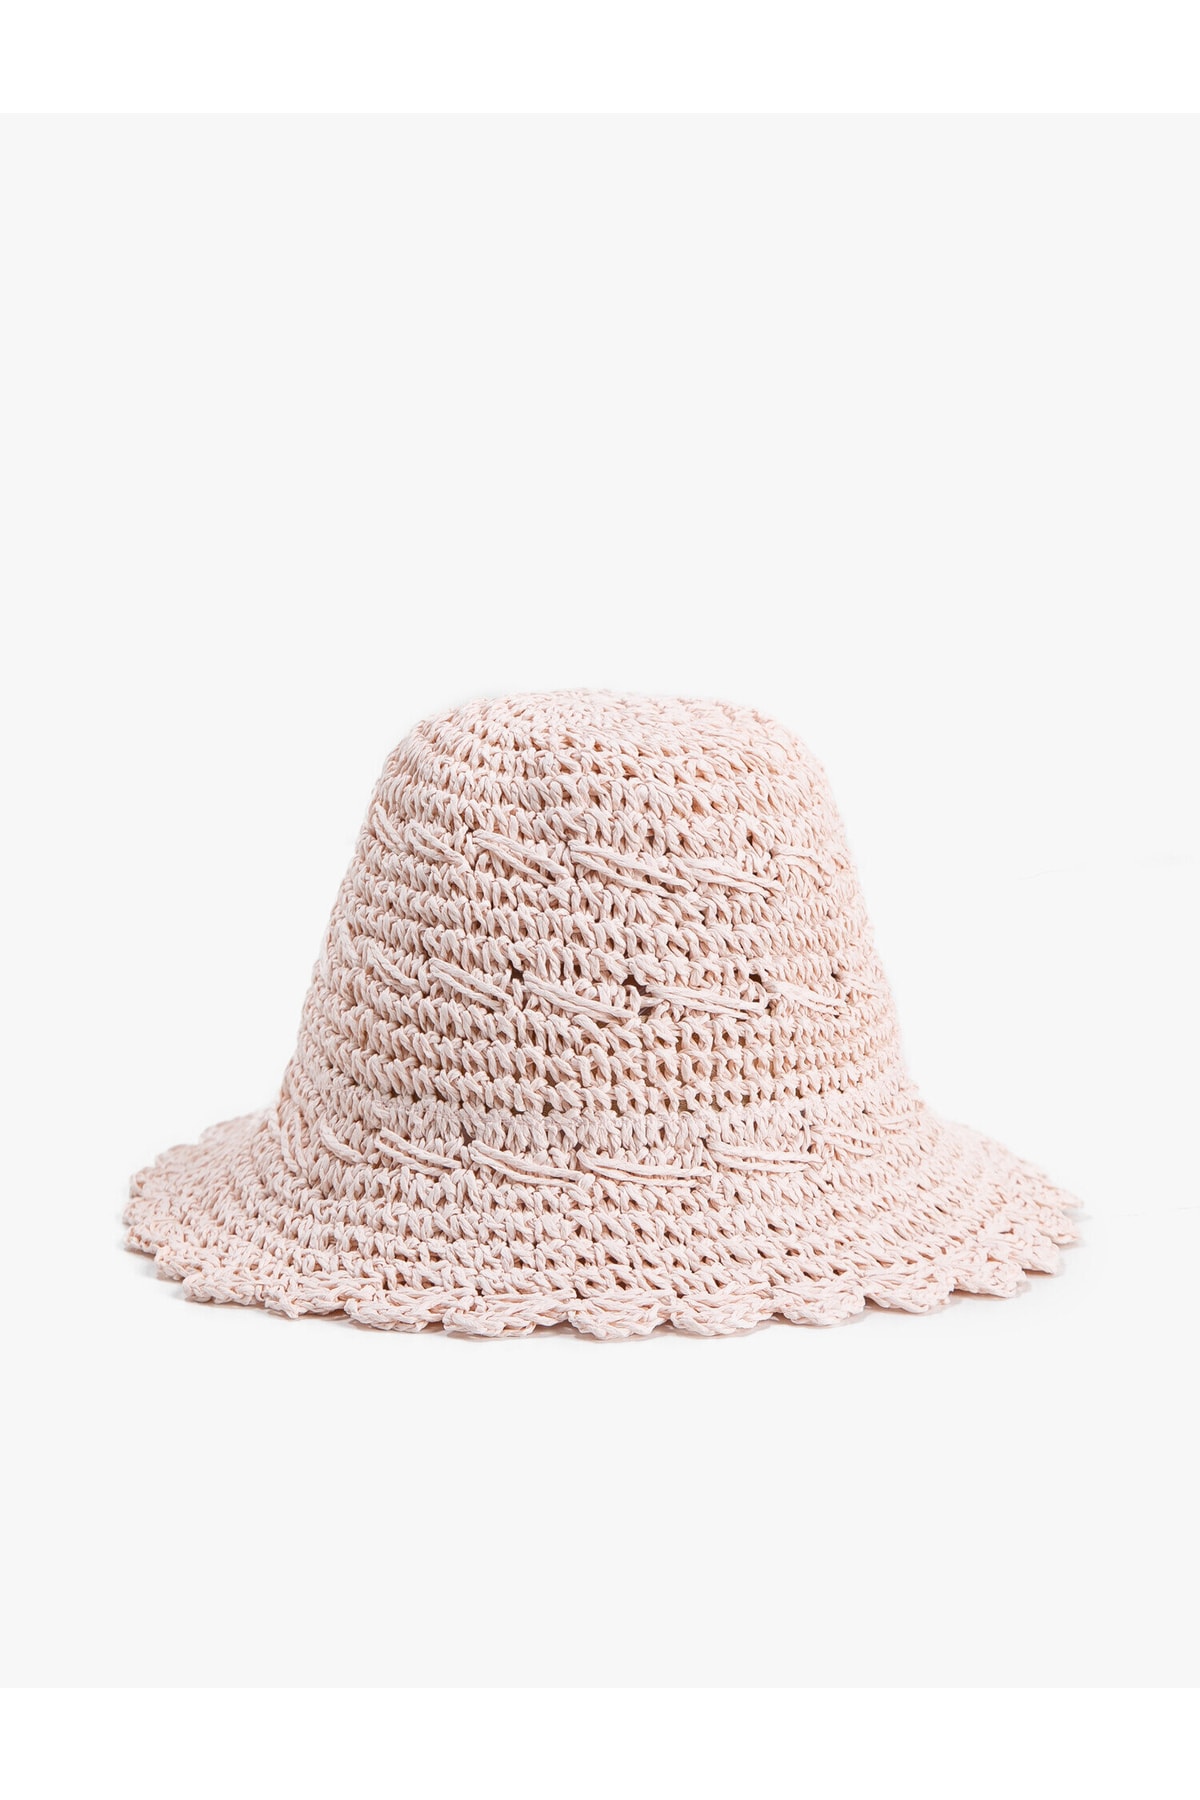 Koton Straw Knitted Bucket Hat